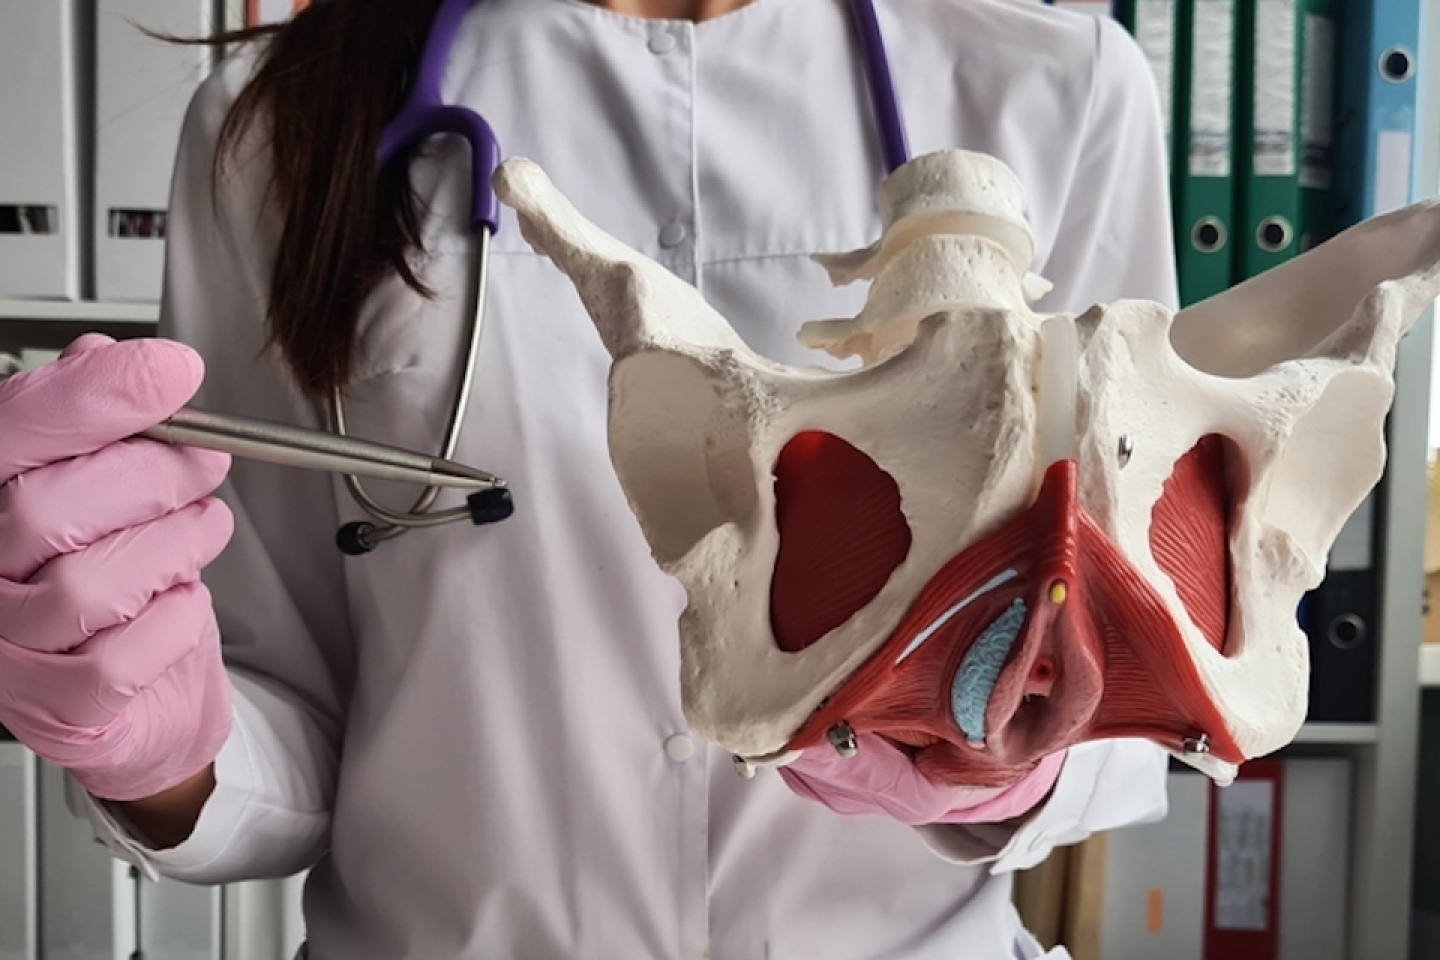 Gynecologist doctor shows location of female pelvis with muscles.